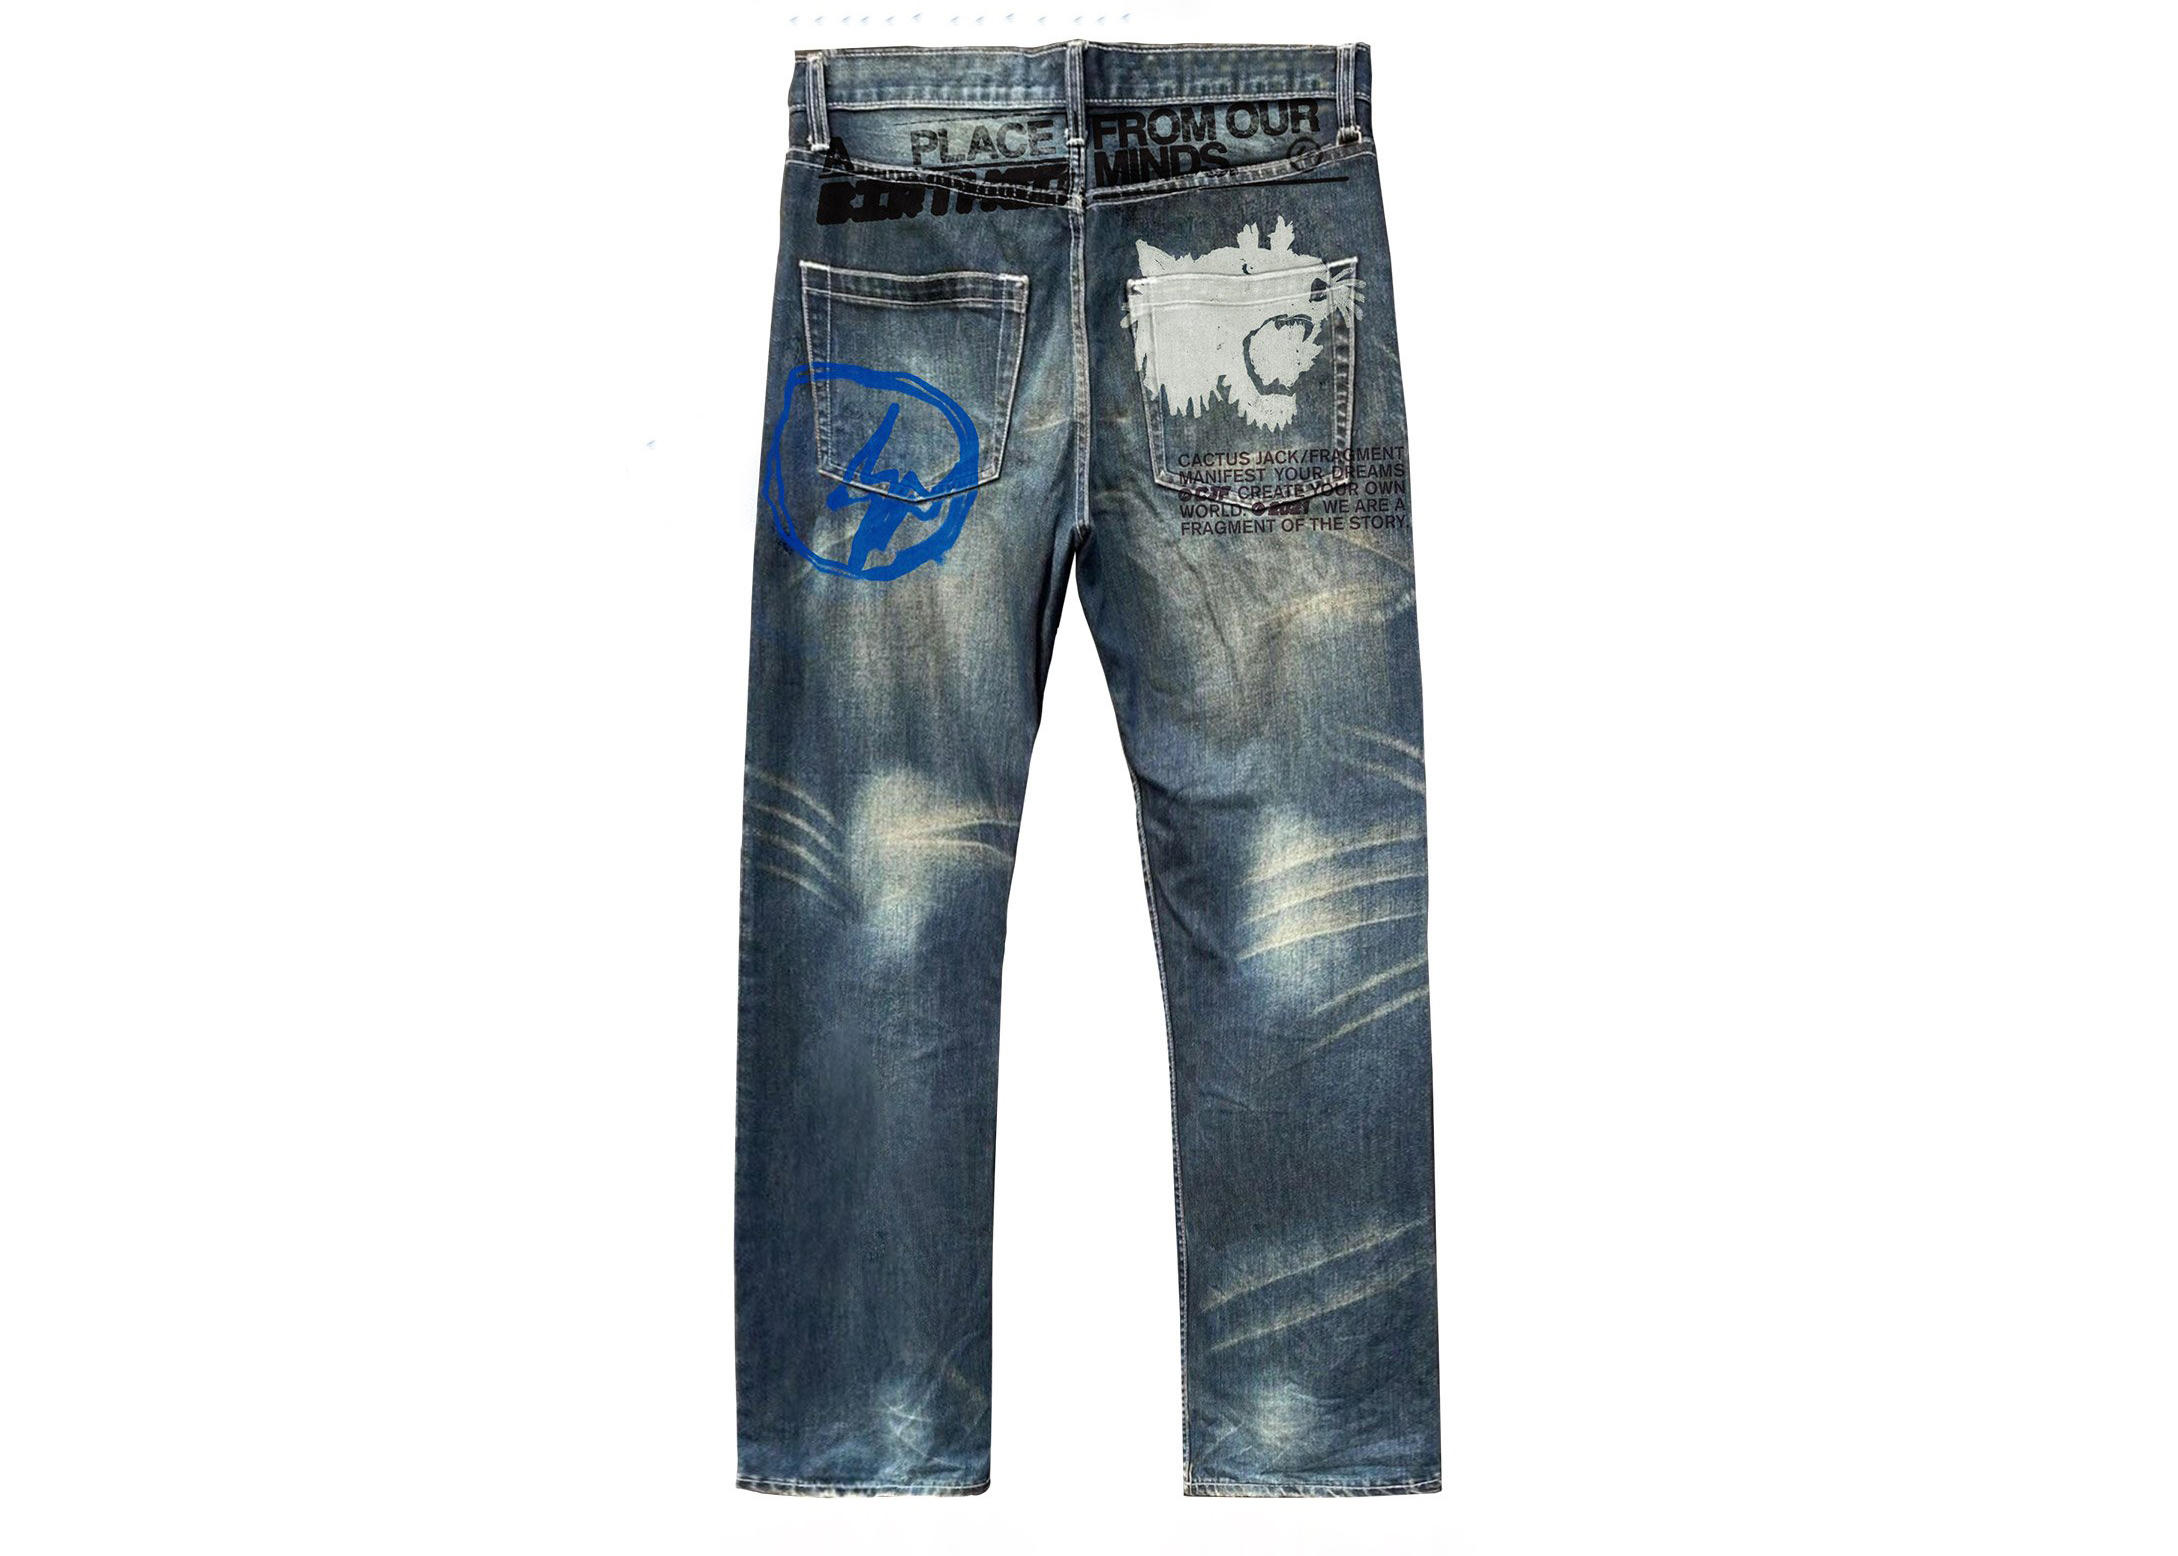 Travis Scott Cactus Jack For Fragment From Our Minds Denim Pant